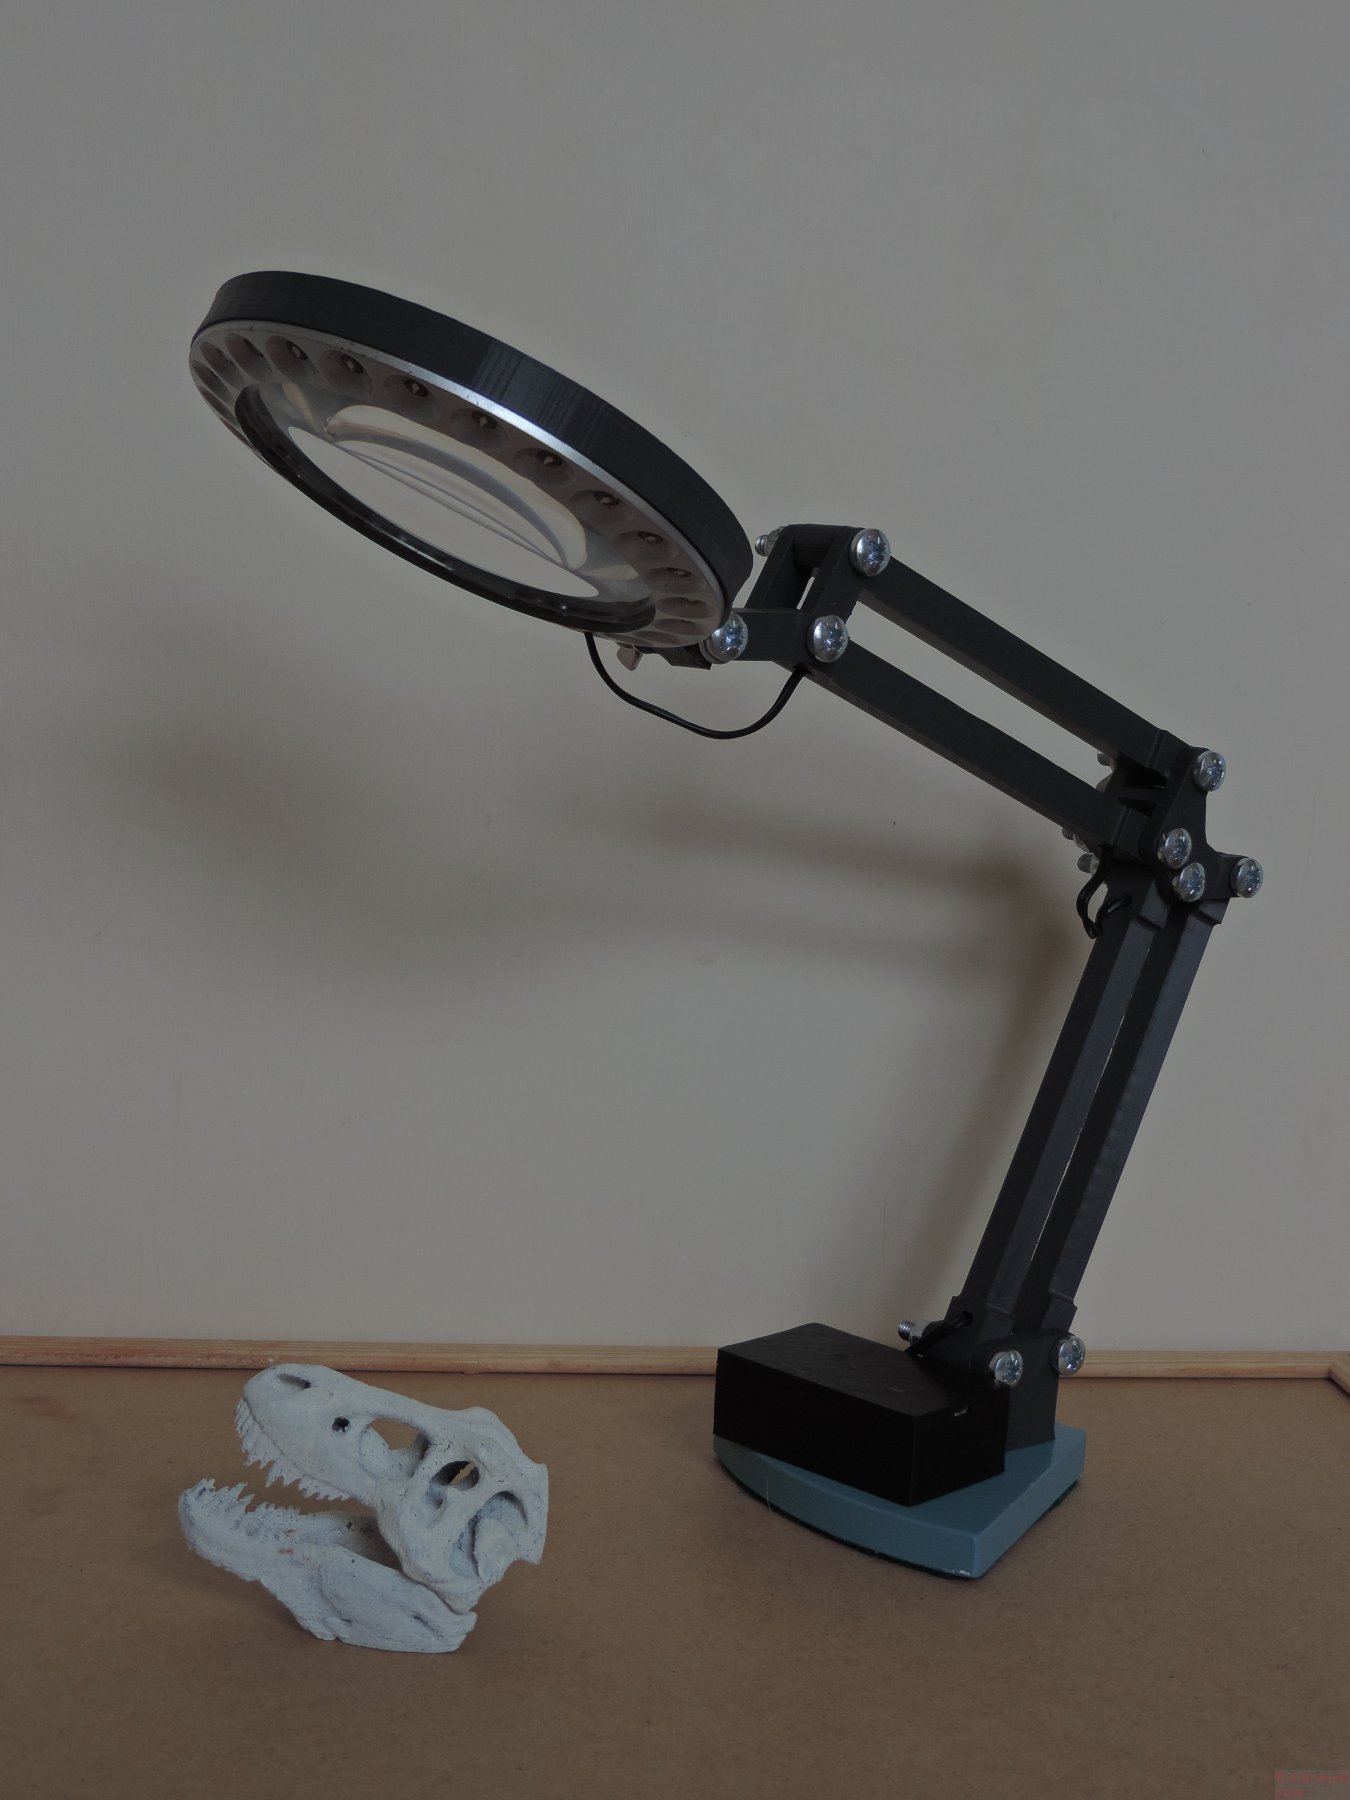 3D printed bench magnifier lamp